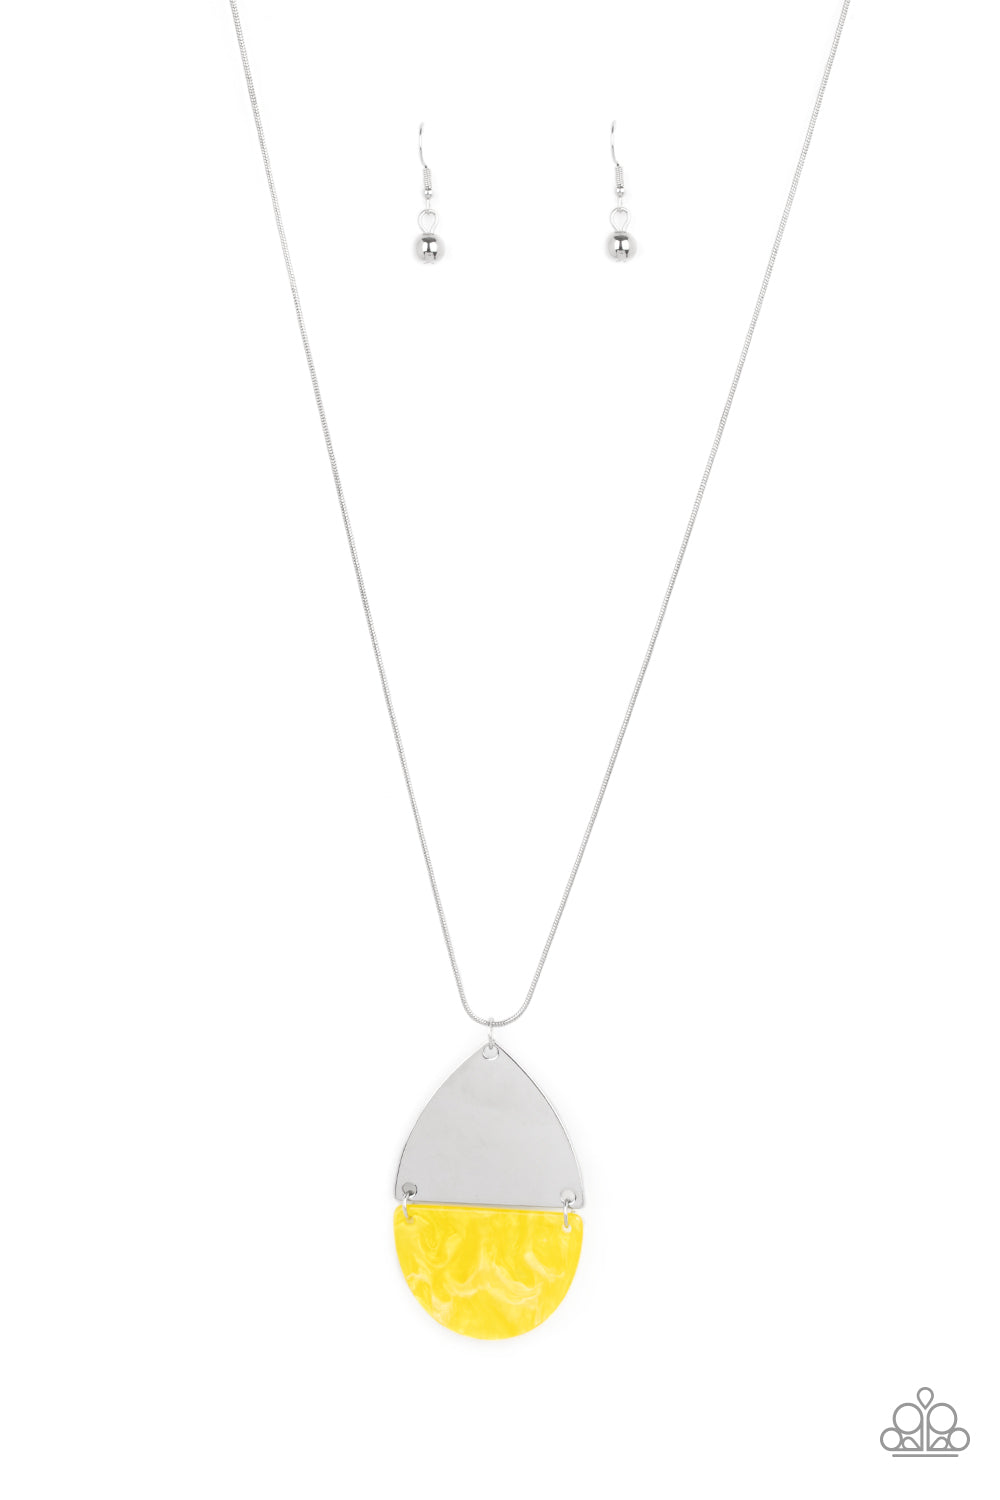 Paparazzi Accessories Rainbow Shores - Yellow Necklaces - Lady T Accessories